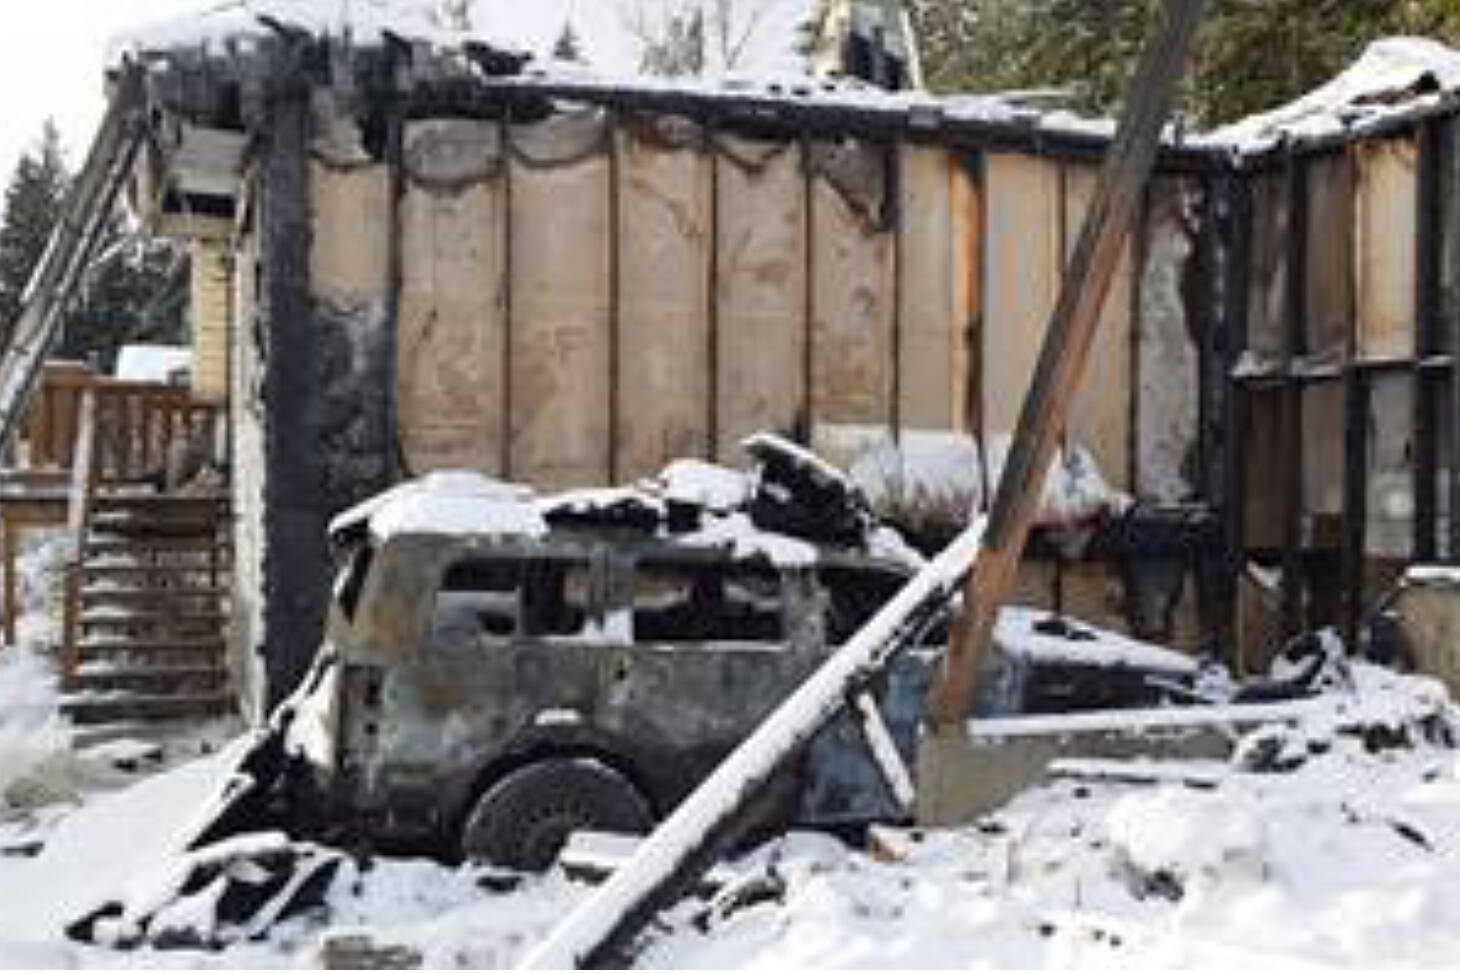 Bonnie Thomas and her son Darcy Andrew escaped from their burning home west of Salmon Arm on Switzmalph land about 3 a.m. Saturday, Jan. 8 after someone was seen running away from the house. (Contributed)